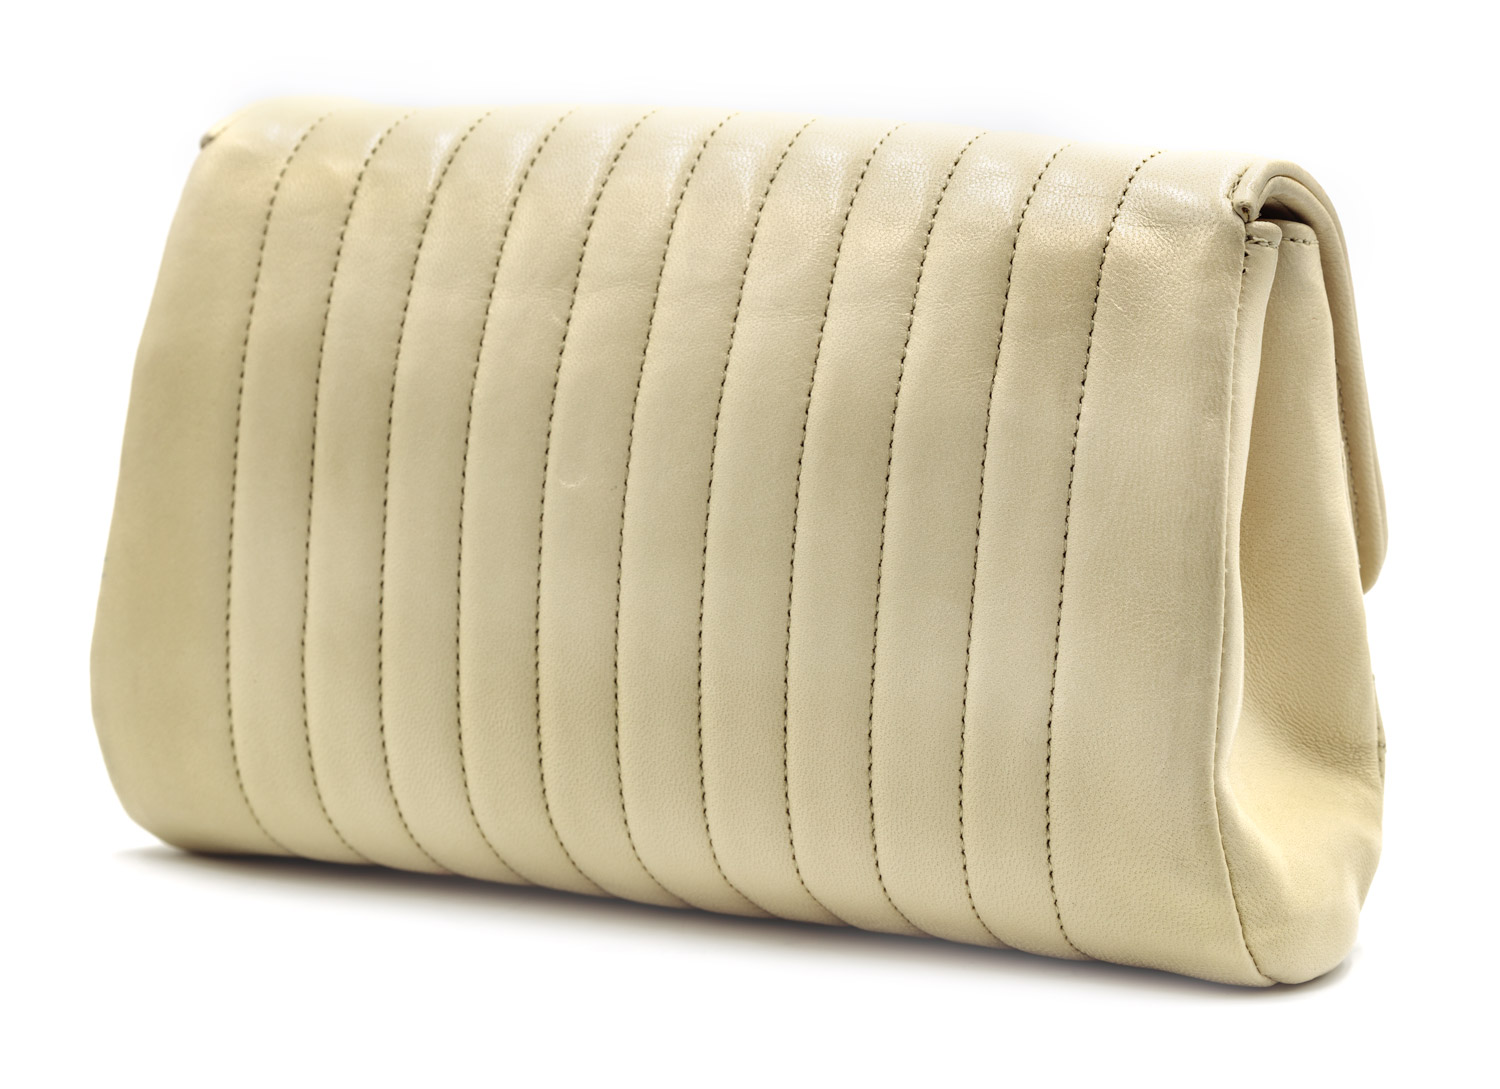 quilted leather clutch